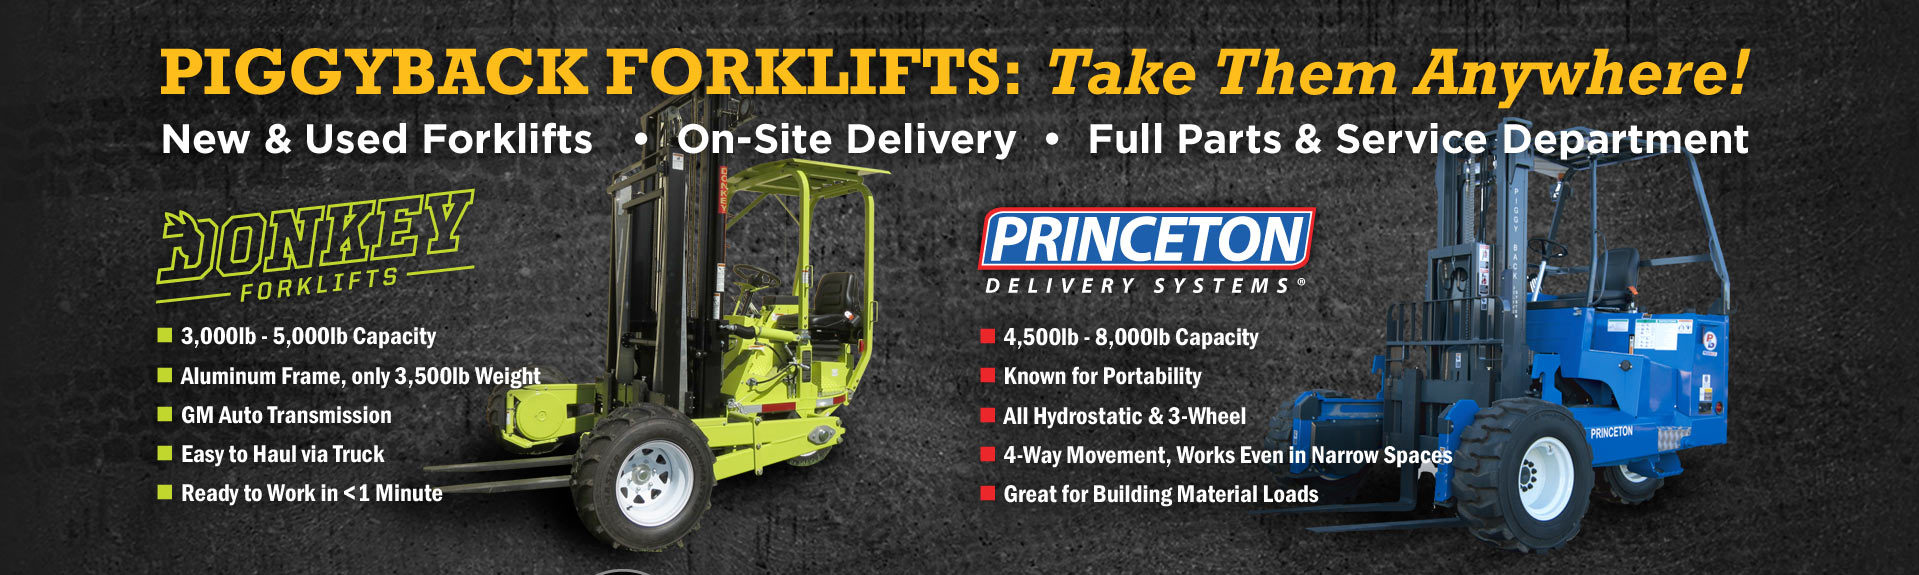 Piggyback Forklift Deals in Cromer California and Nevada Locations